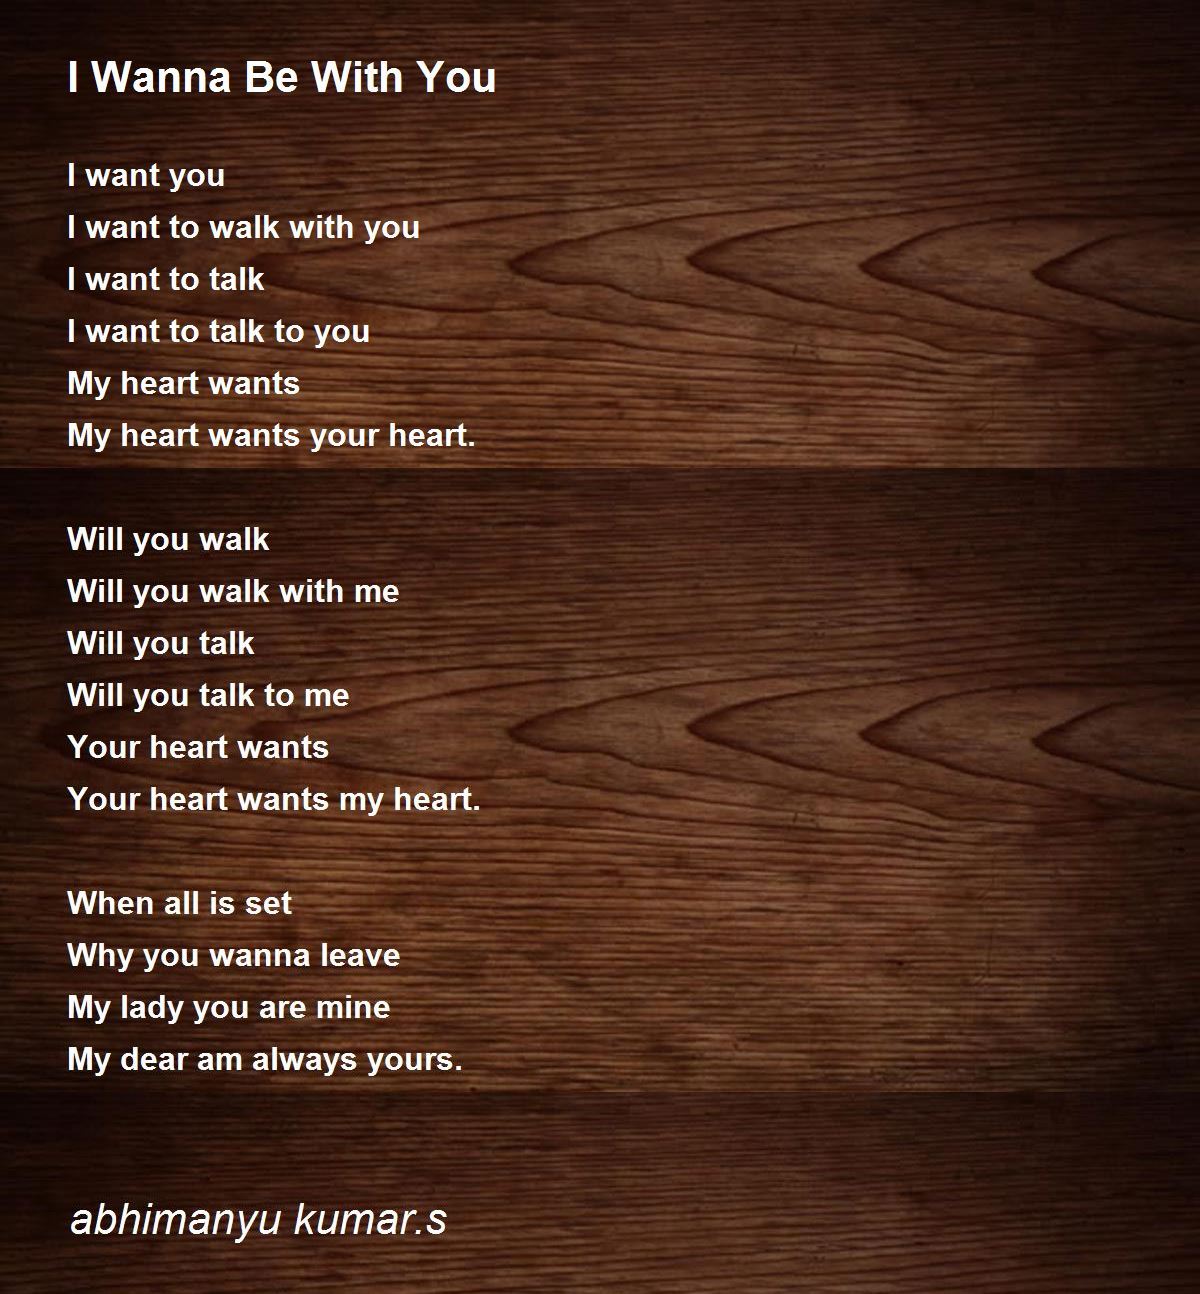 I wanna be with you poems